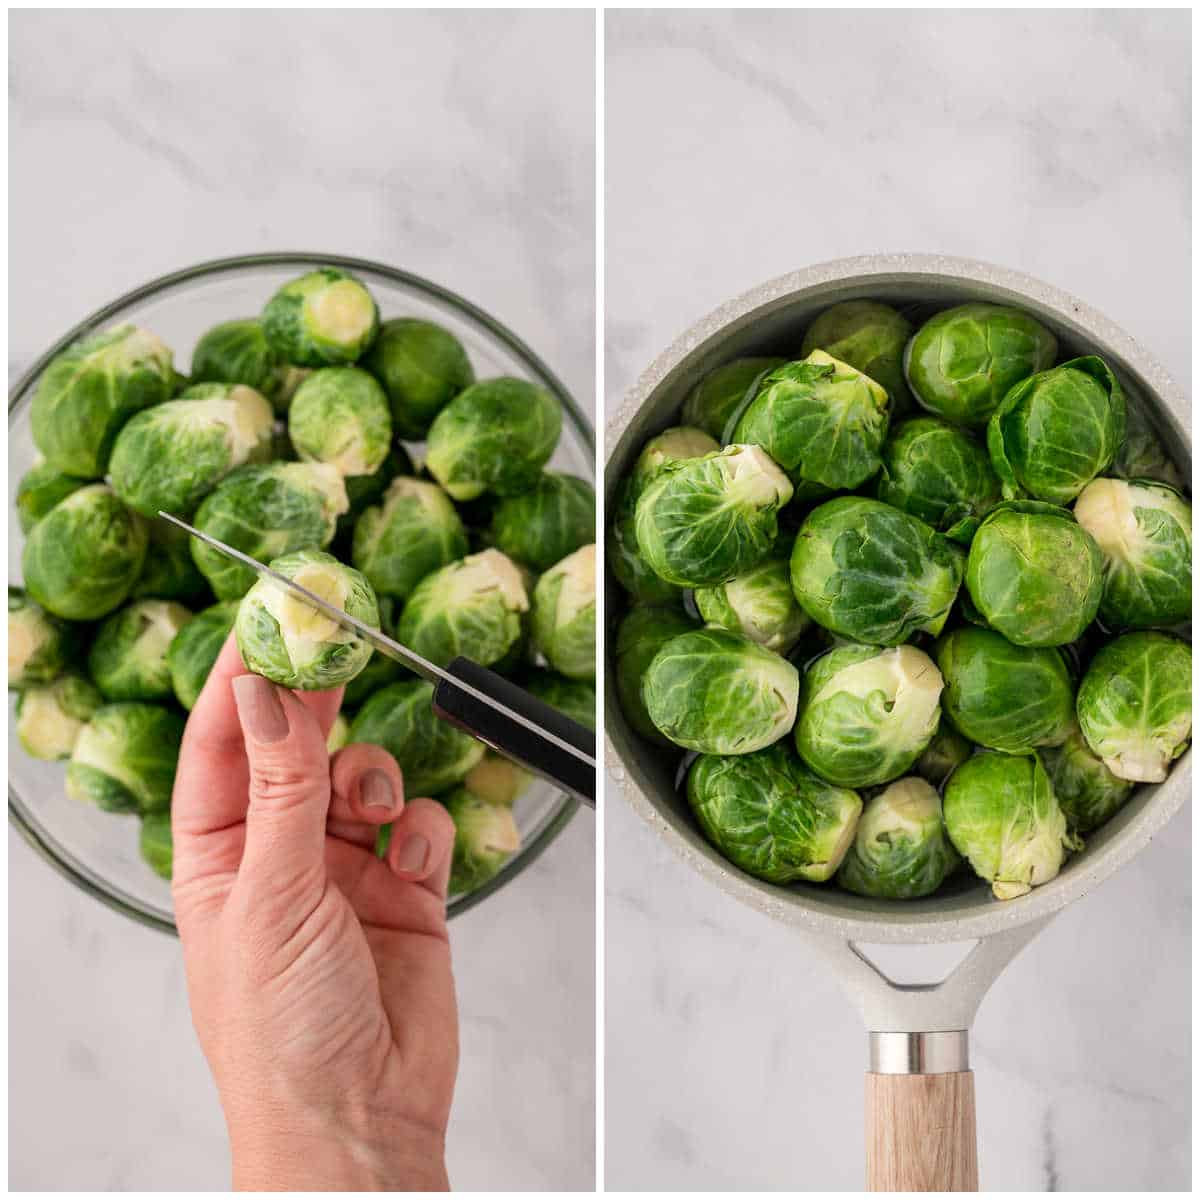 Steps to make cheesy brussel sprouts.